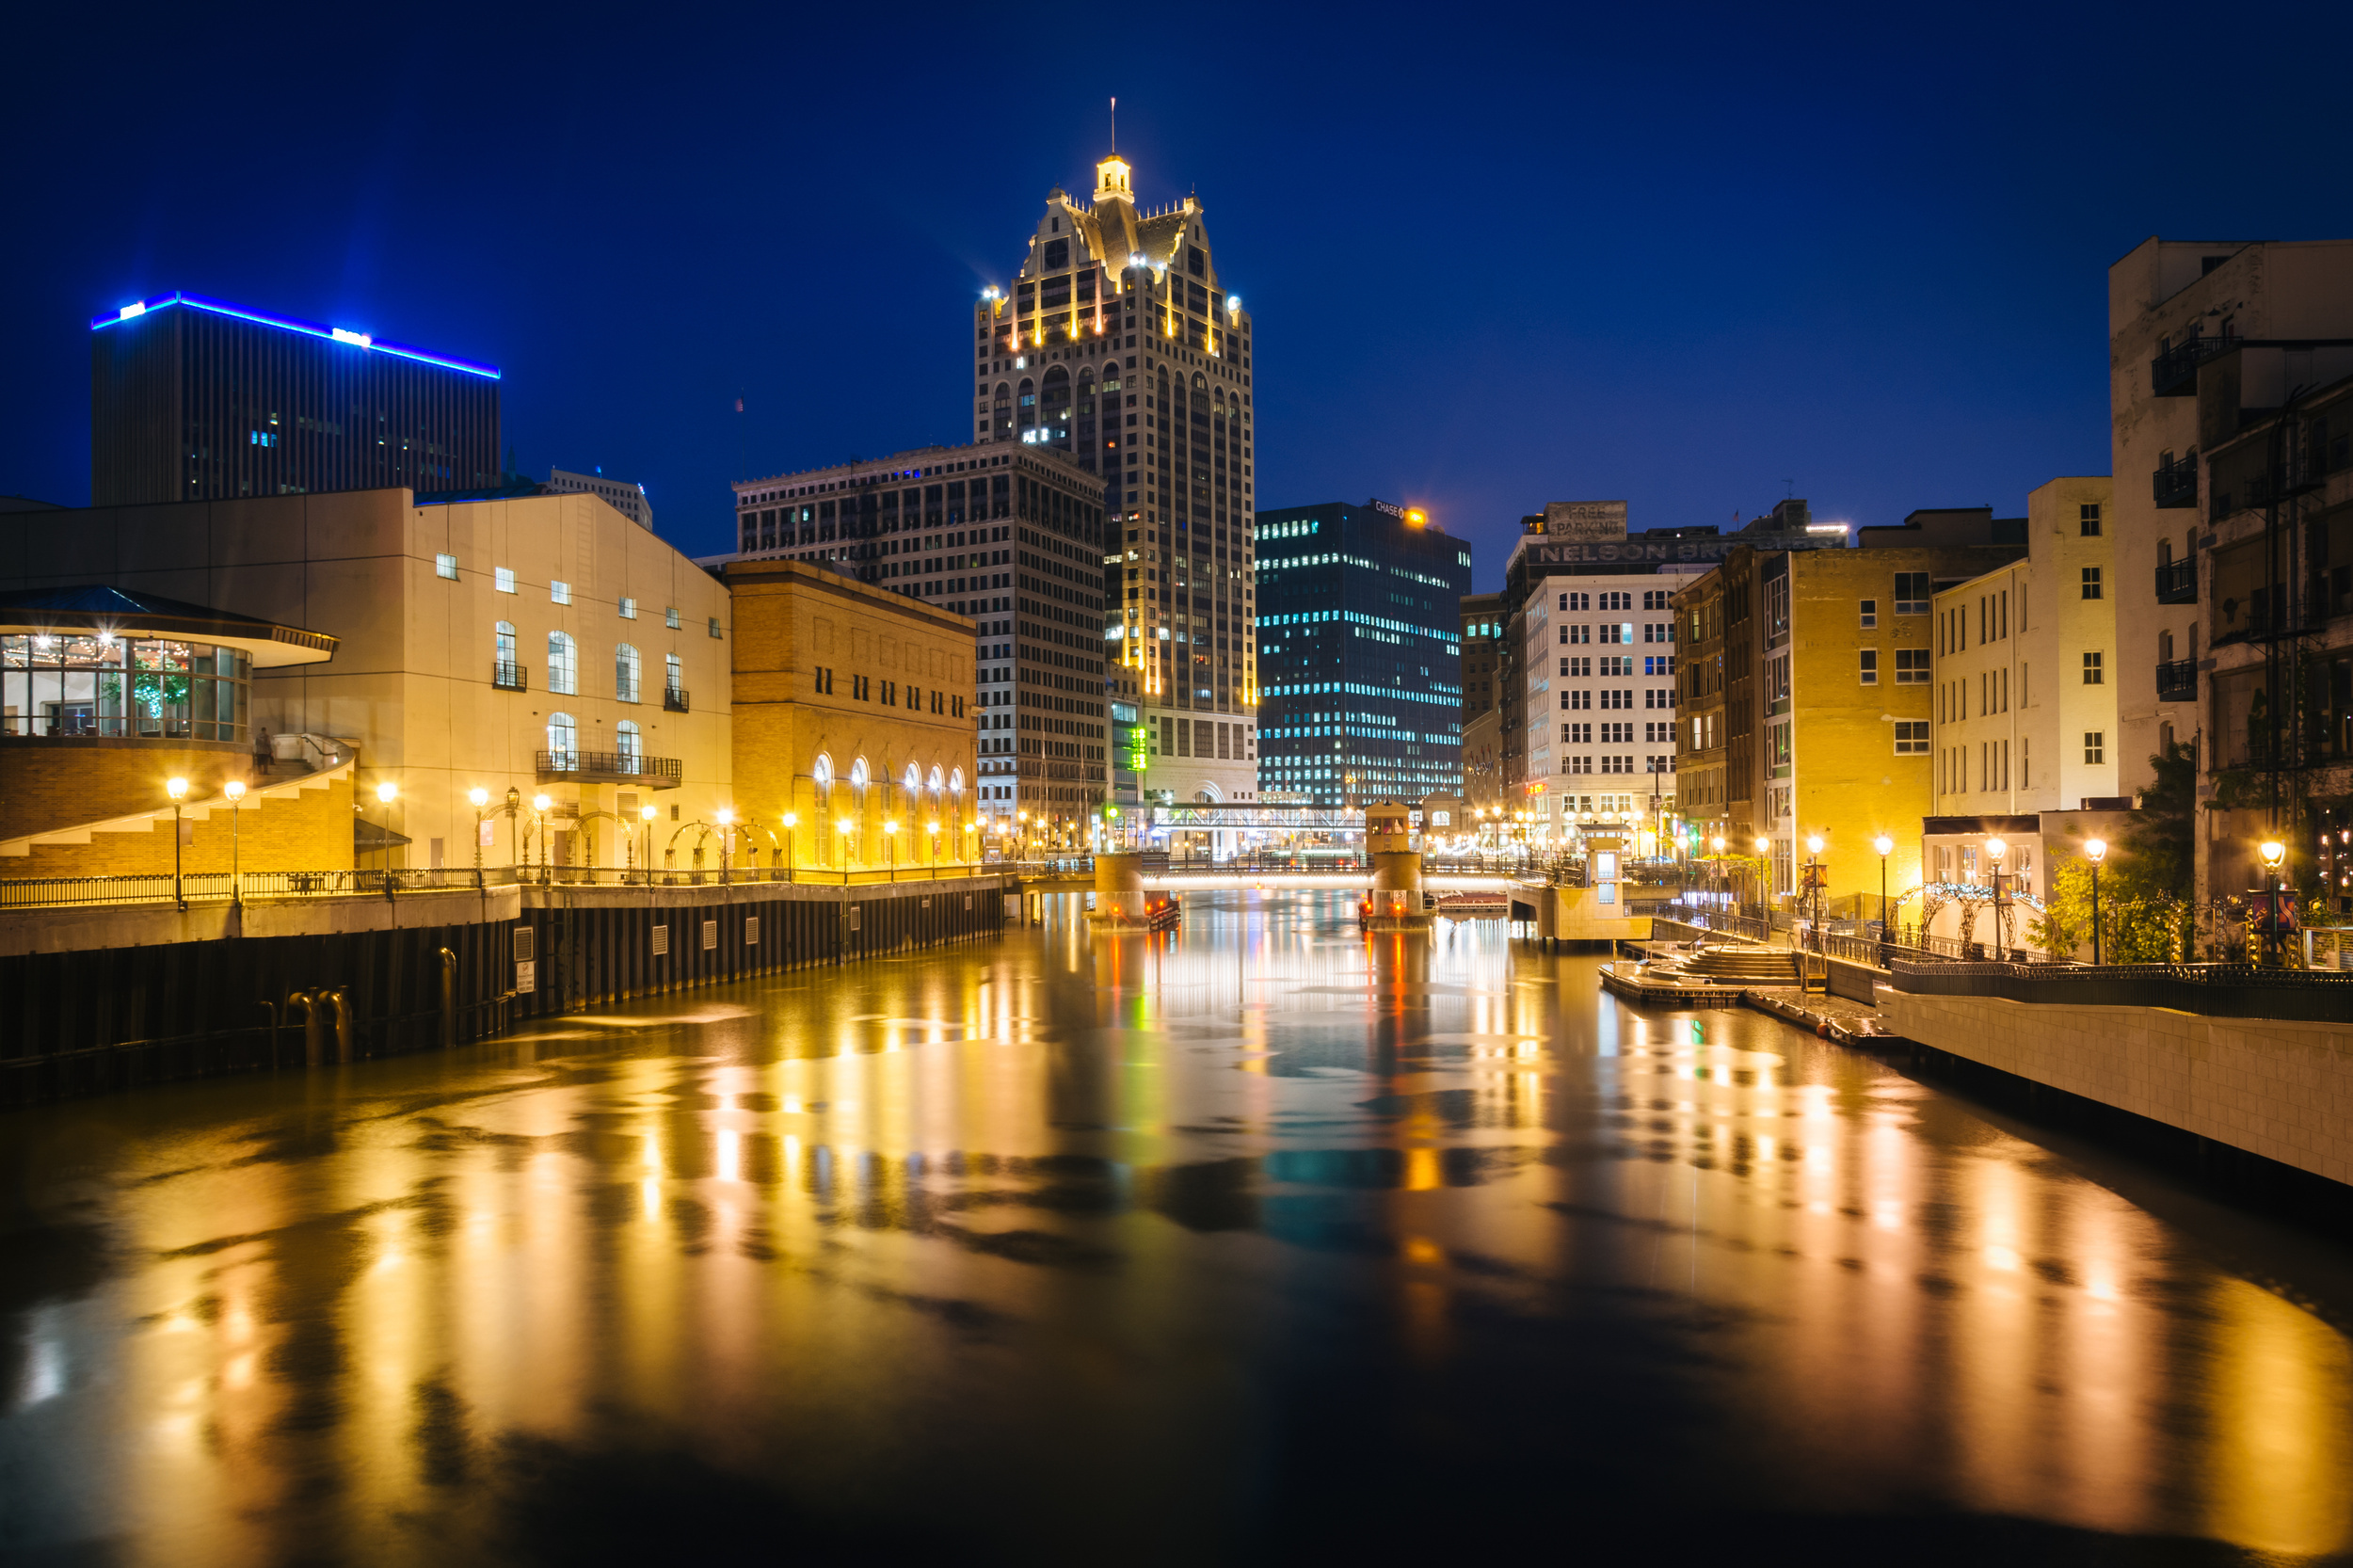 <p>No place in Wisconsin should be doubted for its nightlife. Even the smallest towns have something to offer. That said, one of its bigger towns, Milwaukee, has lots going on into the wee hours of the night, with lots of places near the water serving as prime locations. </p><p><a href='https://www.msn.com/en-us/community/channel/vid-cj9pqbr0vn9in2b6ddcd8sfgpfq6x6utp44fssrv6mc2gtybw0us'>Follow us on MSN to see more of our exclusive lifestyle content.</a></p>